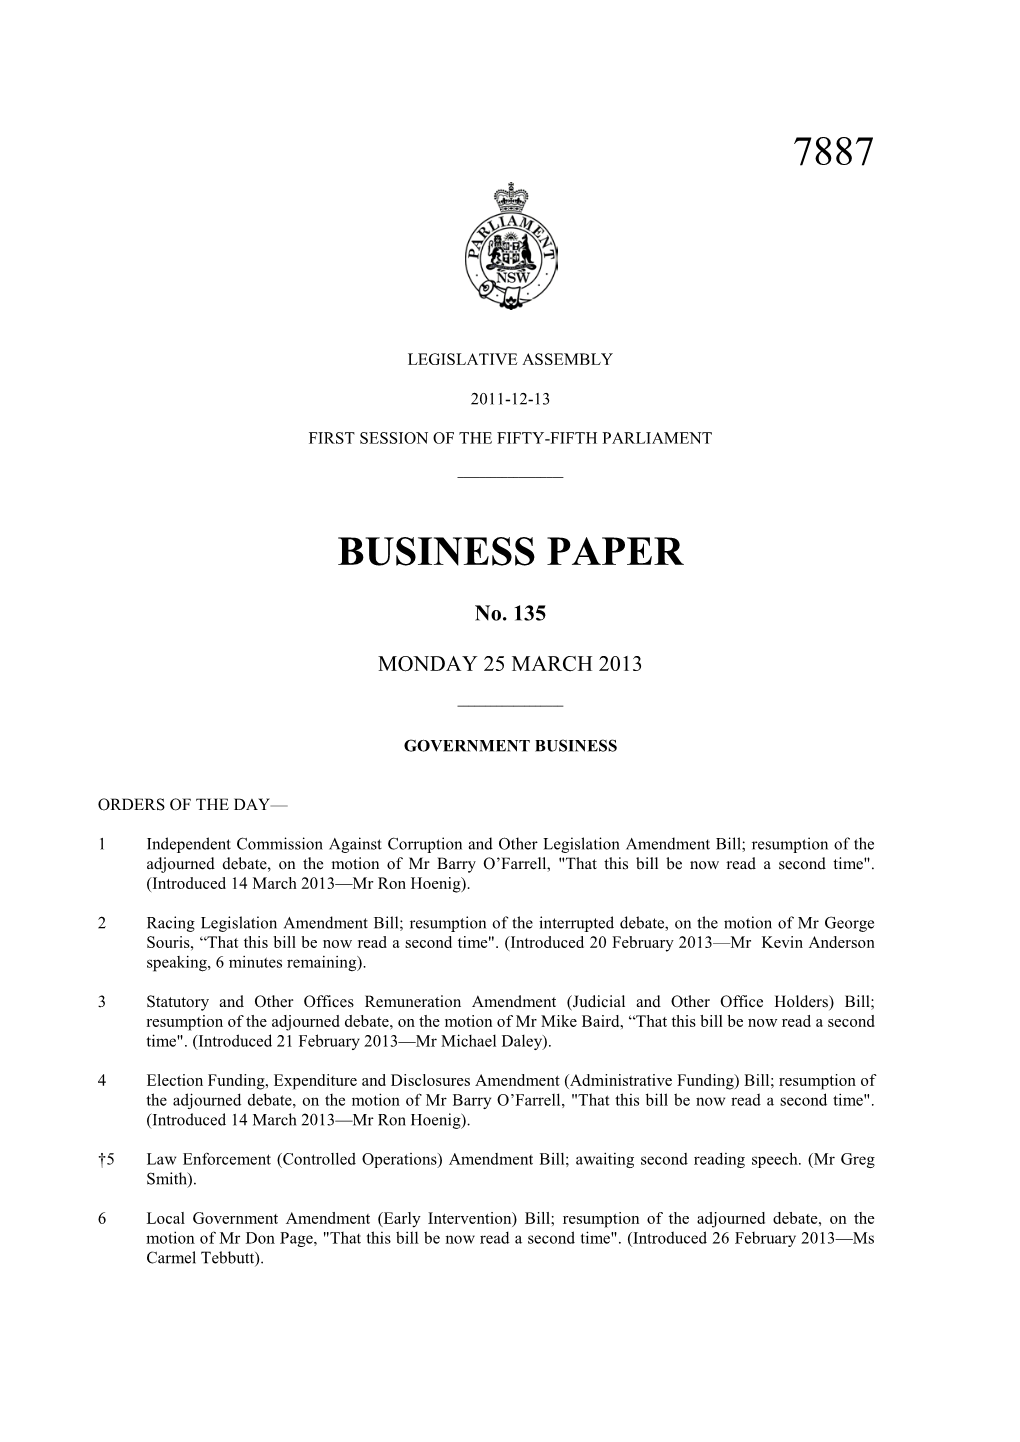 7887 Business Paper